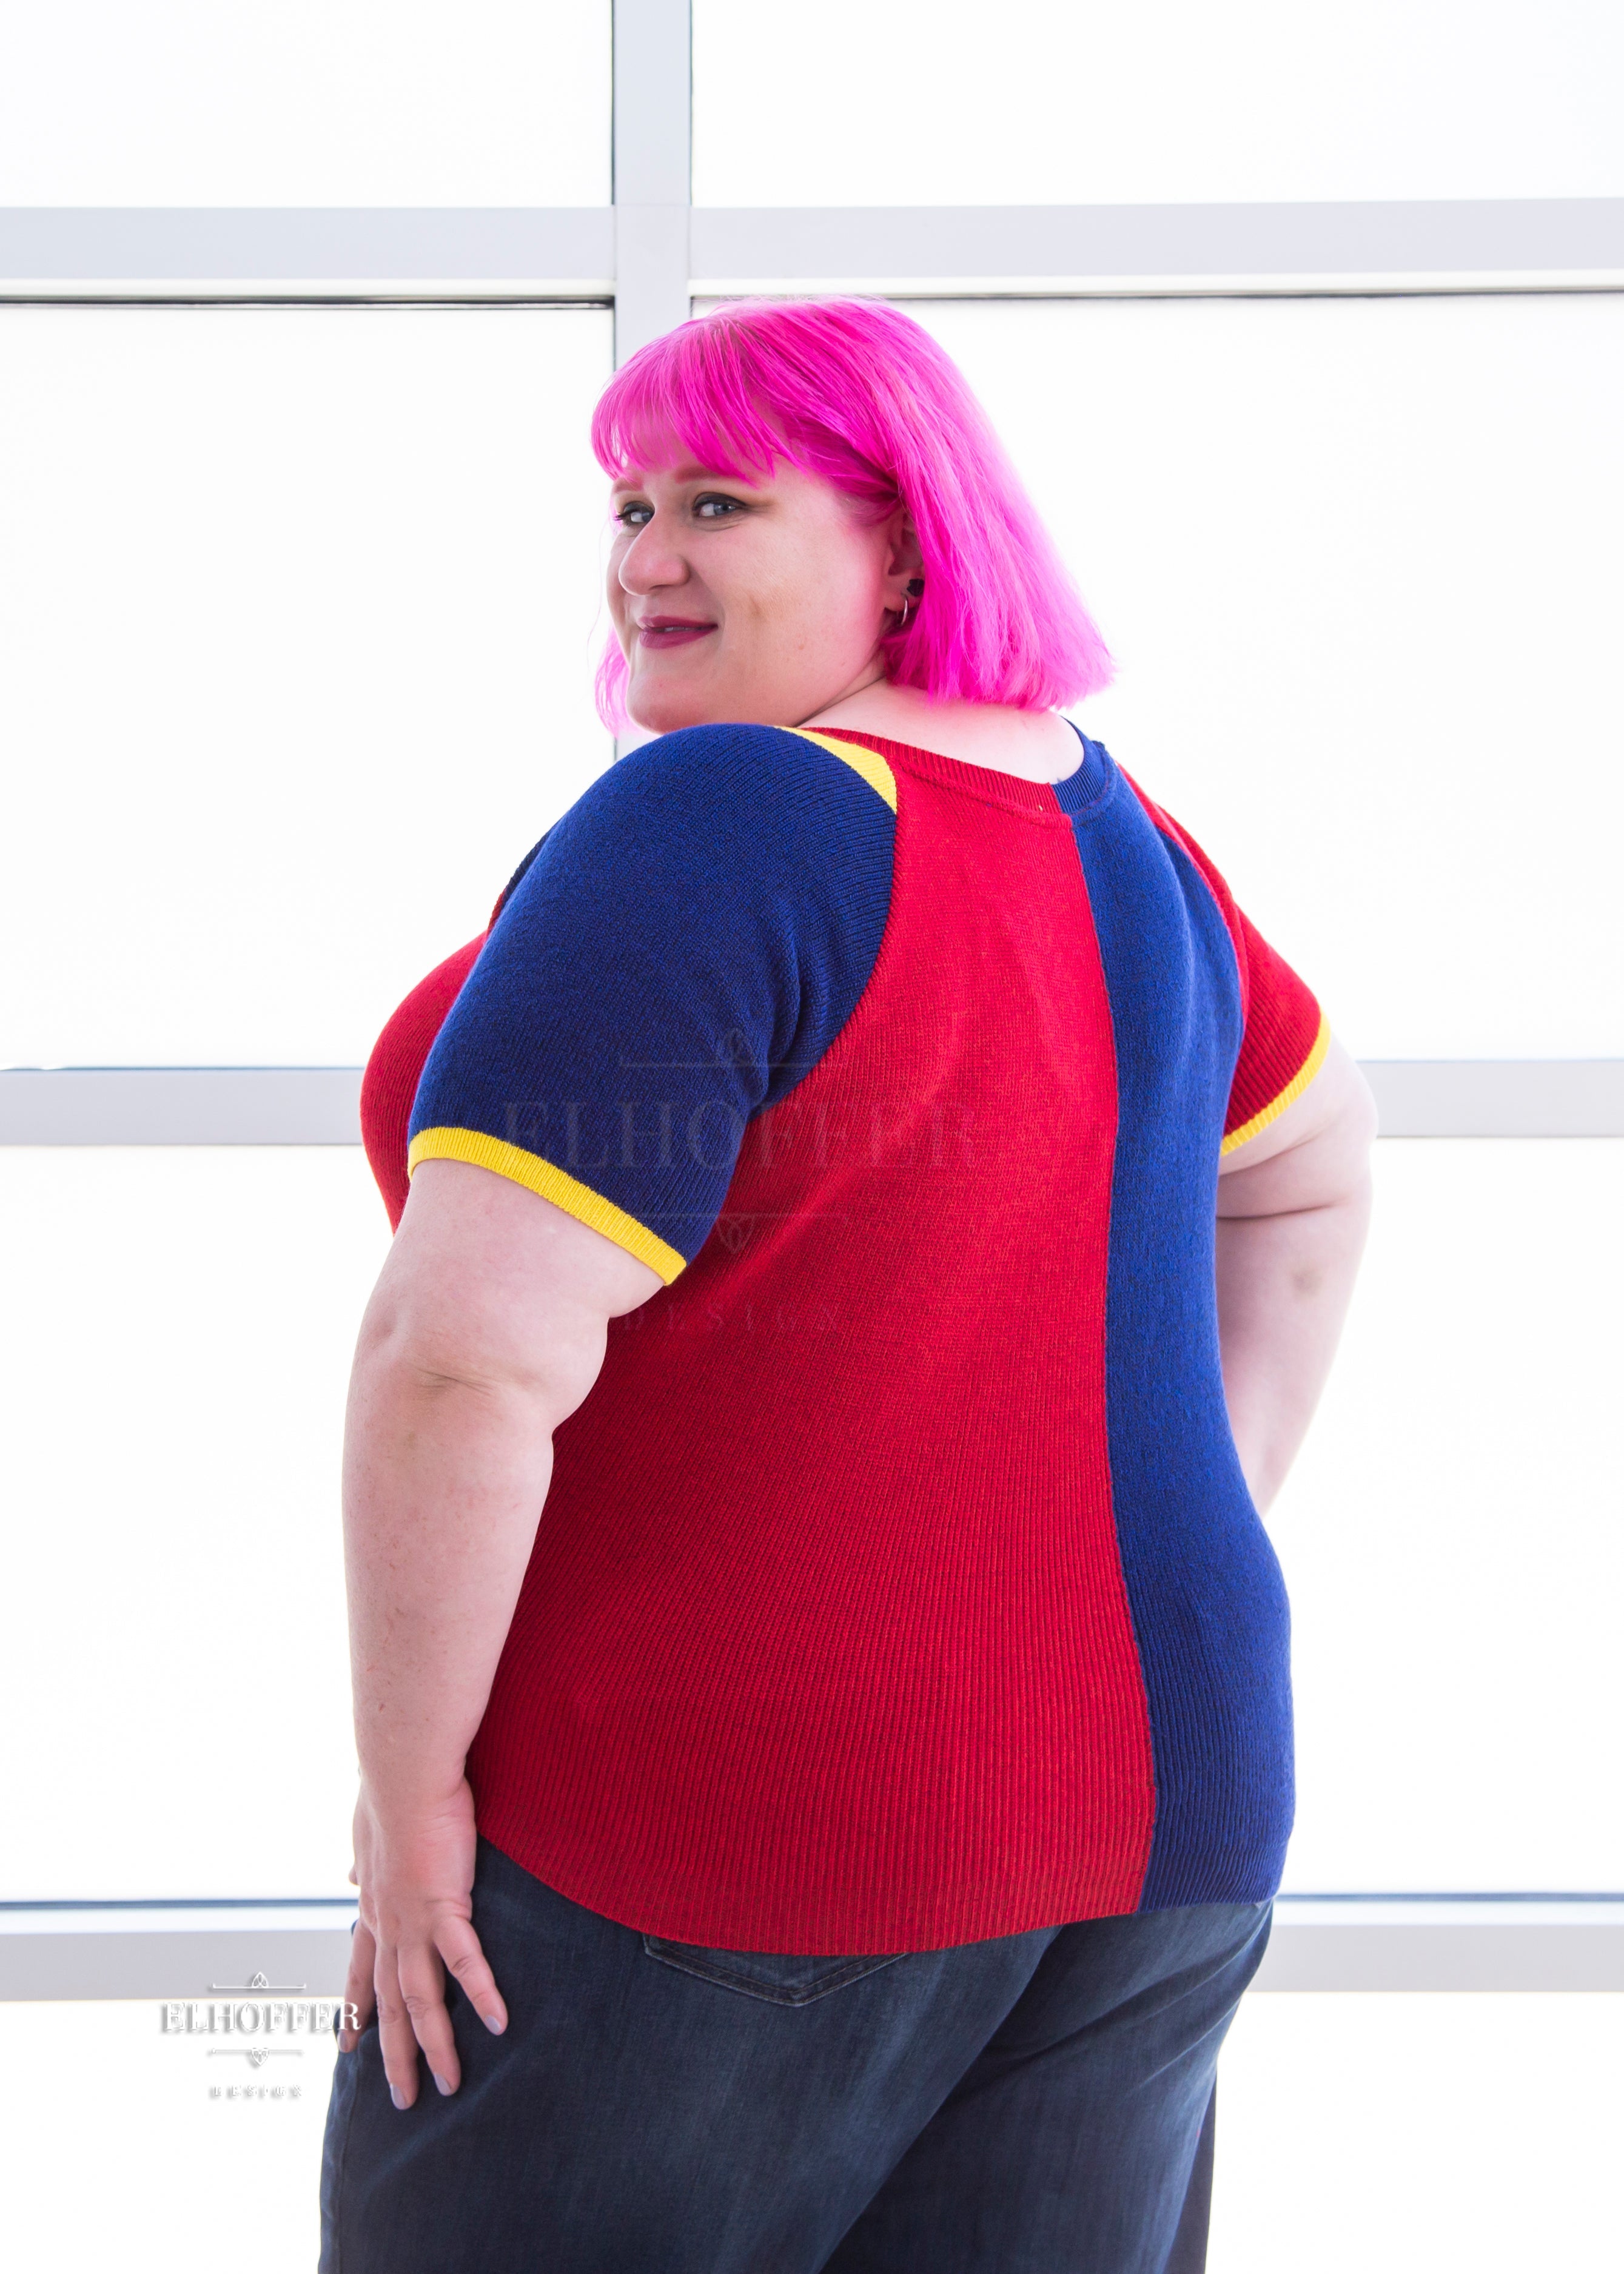 Logan is modeling the Production 3XL. She has a 54.5” Chest, 50” Waist, 62” hips, and is 5’7”.